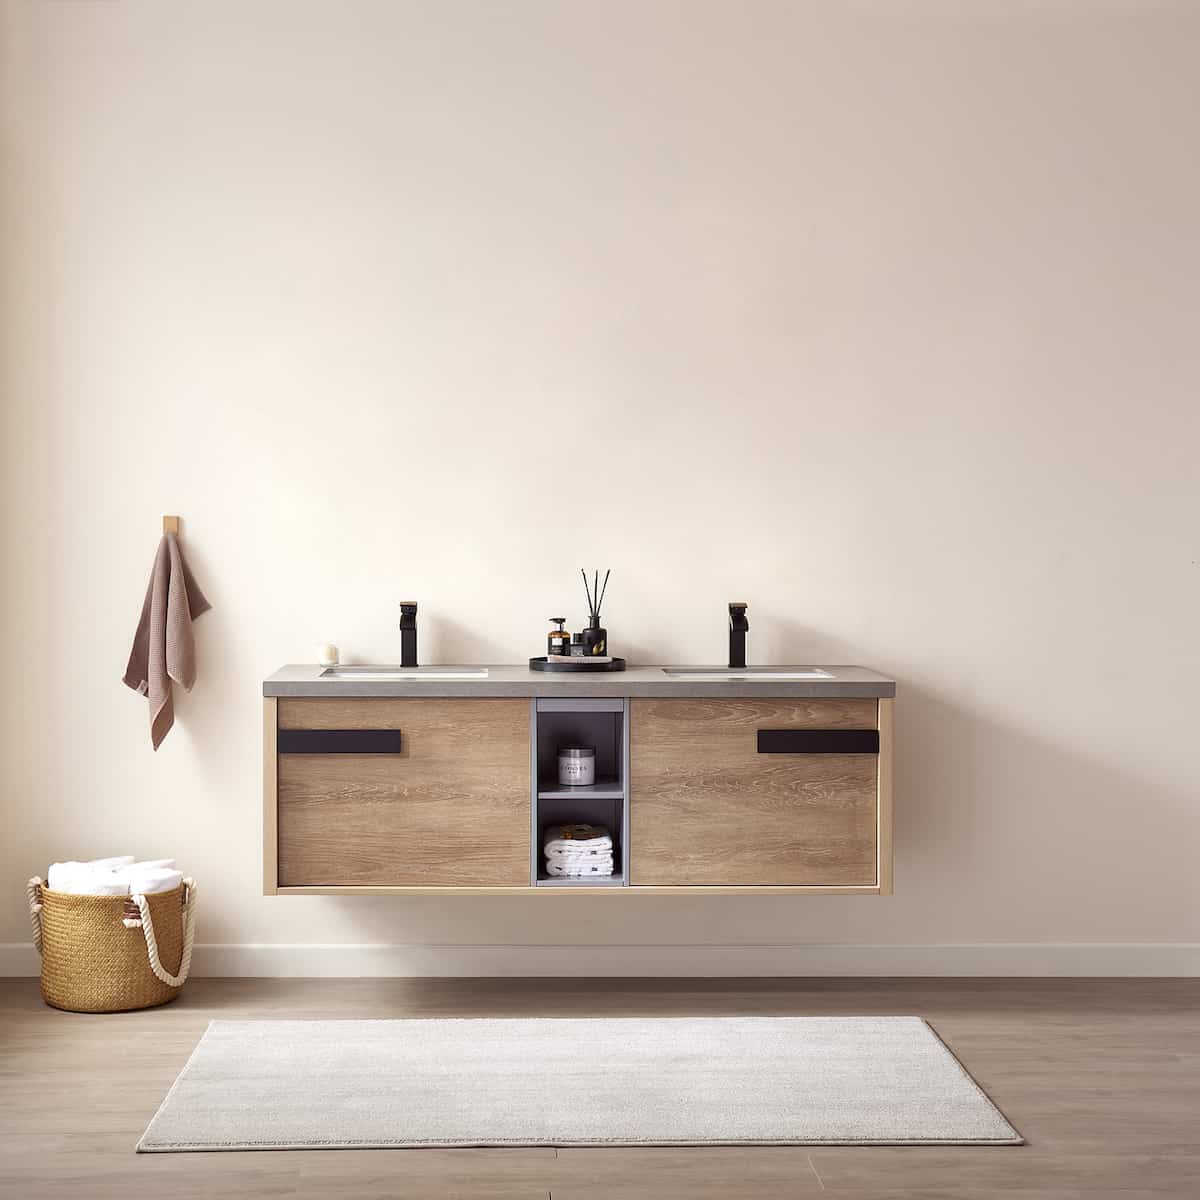 Vinnova Carcastillo 63 Inch Wall Mount Single Sink Vanity in North American Oak with Grey Sintered Stone Top Without Mirror in Bathroom 703263-NO-WK-NM #mirror_without mirror